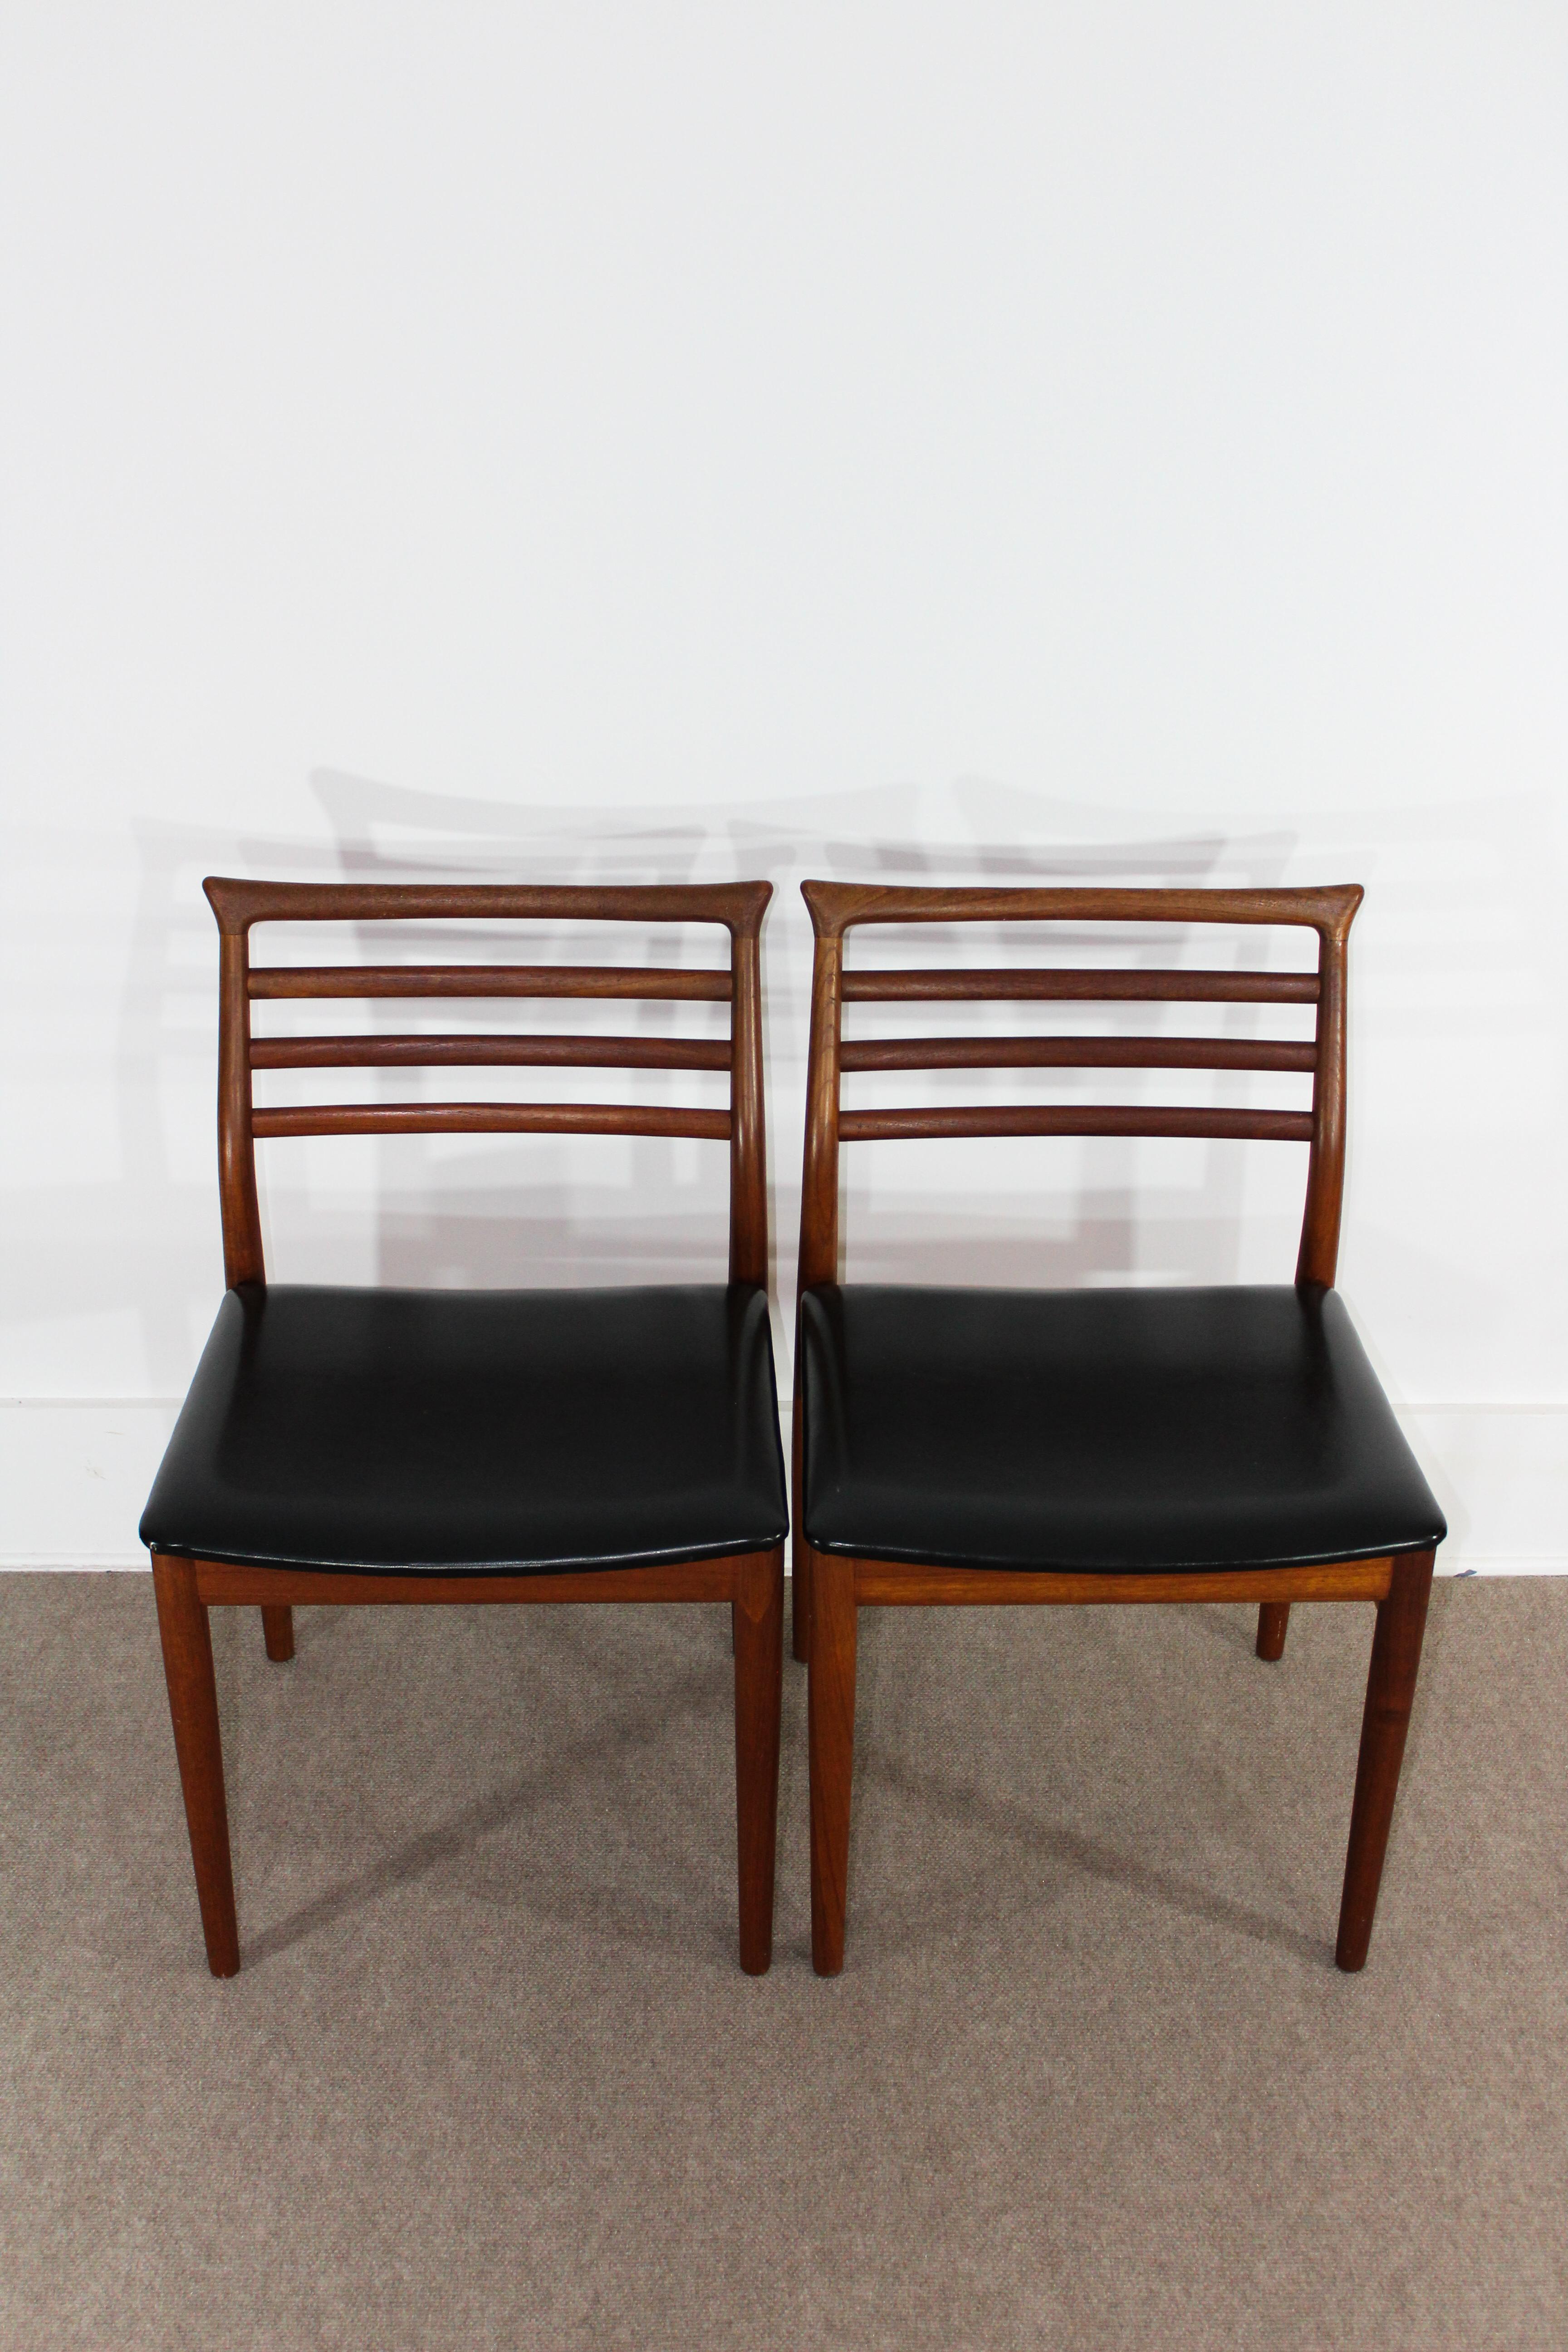 Midcentury Danish Erling Torvits Teak Dining Chairs, 2 Available 1